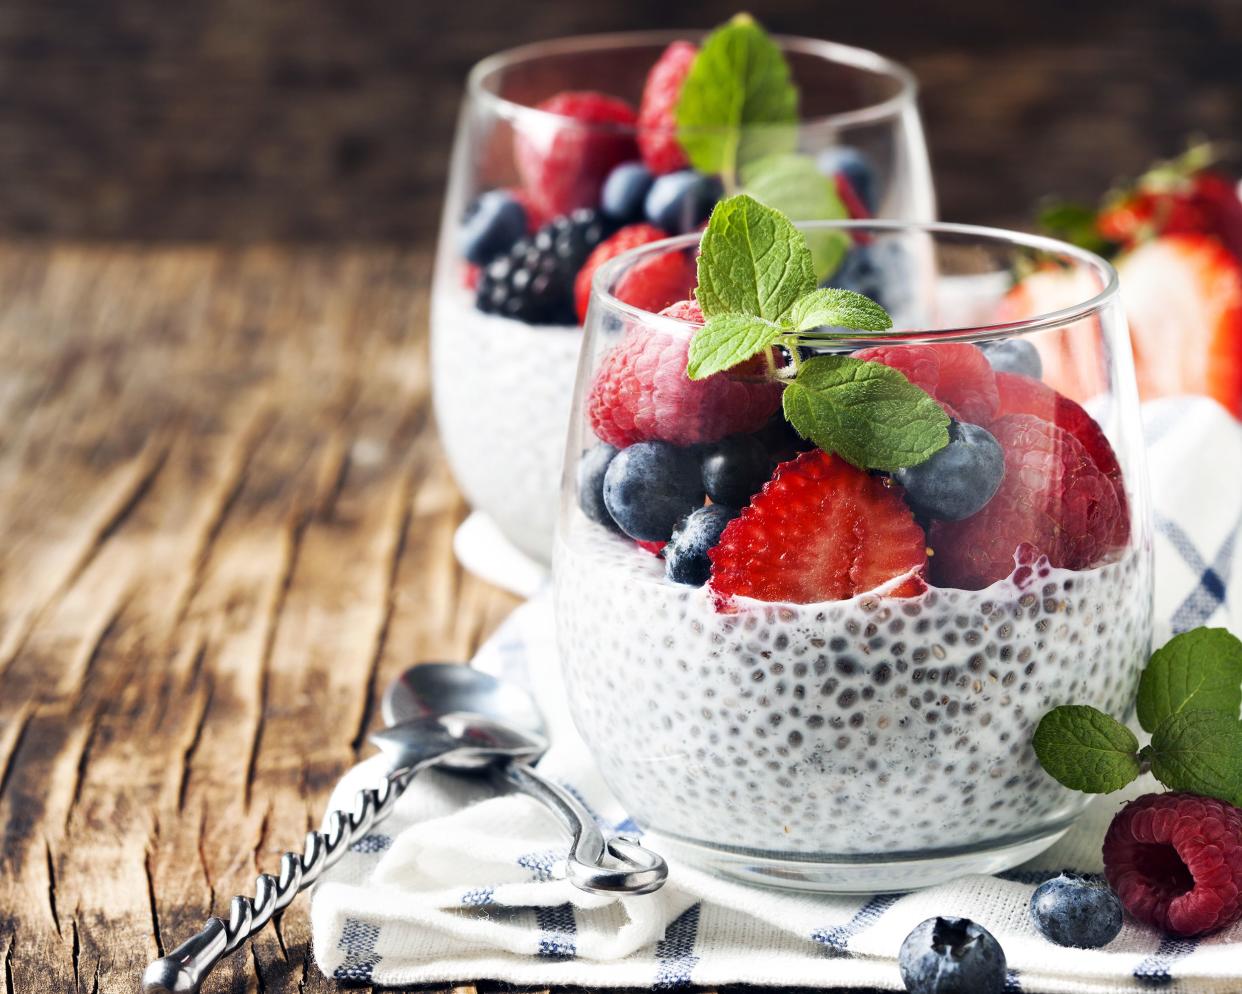 Two basic chia seed pudding in glass cups with strawberries, raspberries, blueberries, and blackberries, with two spoons on a blue-lined white napkin, on the right, on a rustic wooden bench with a blurred background